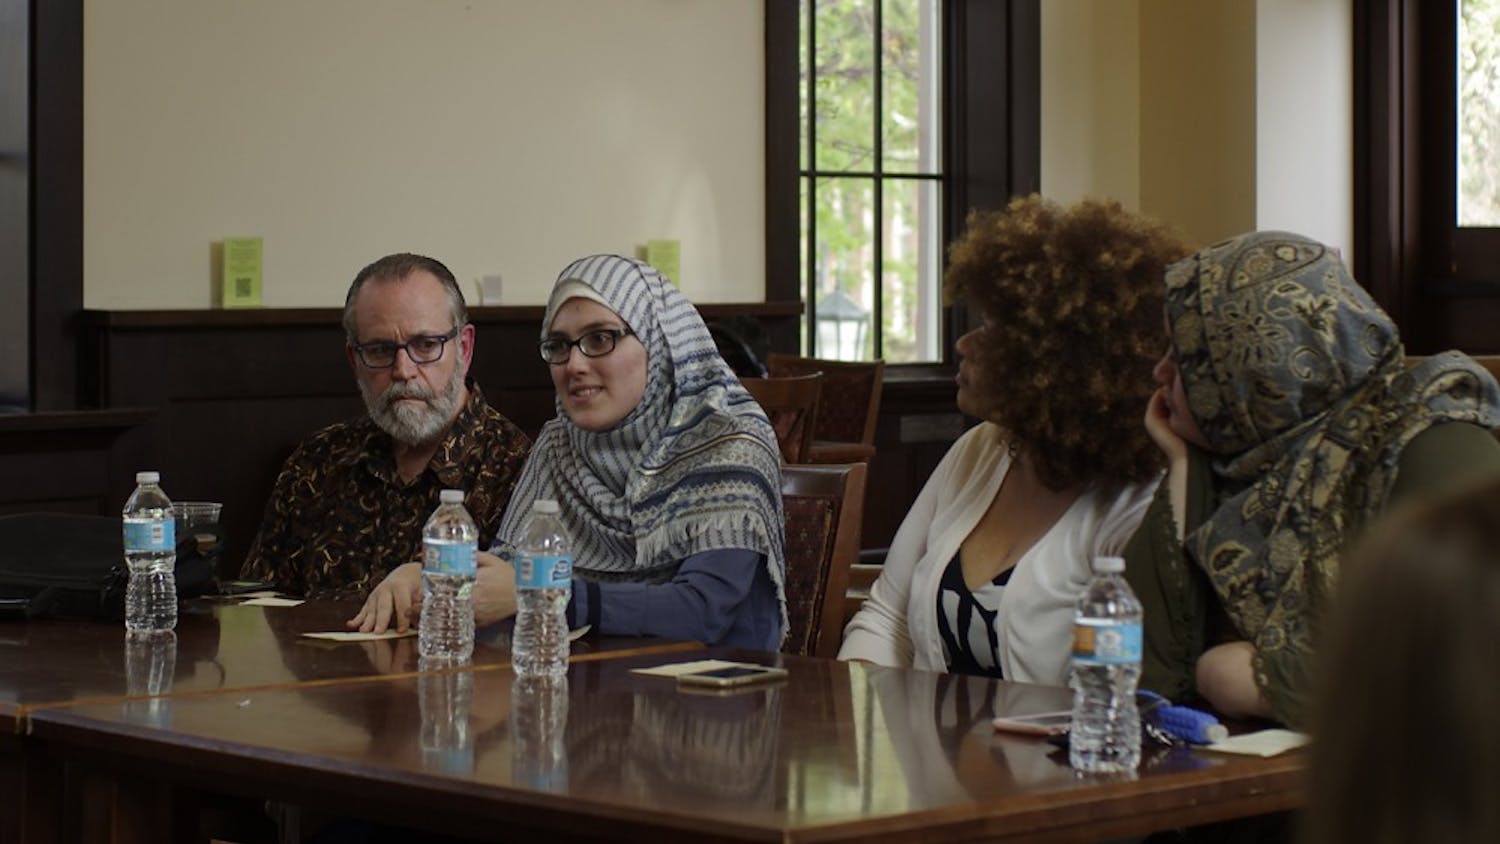 From Left, Professor Carl Ernst, Soumaya Lansari, Iyman Gaspard and Mariam Baaj speak at the Understanding Muslims and Islam Panel at the Campus Y on Monday.